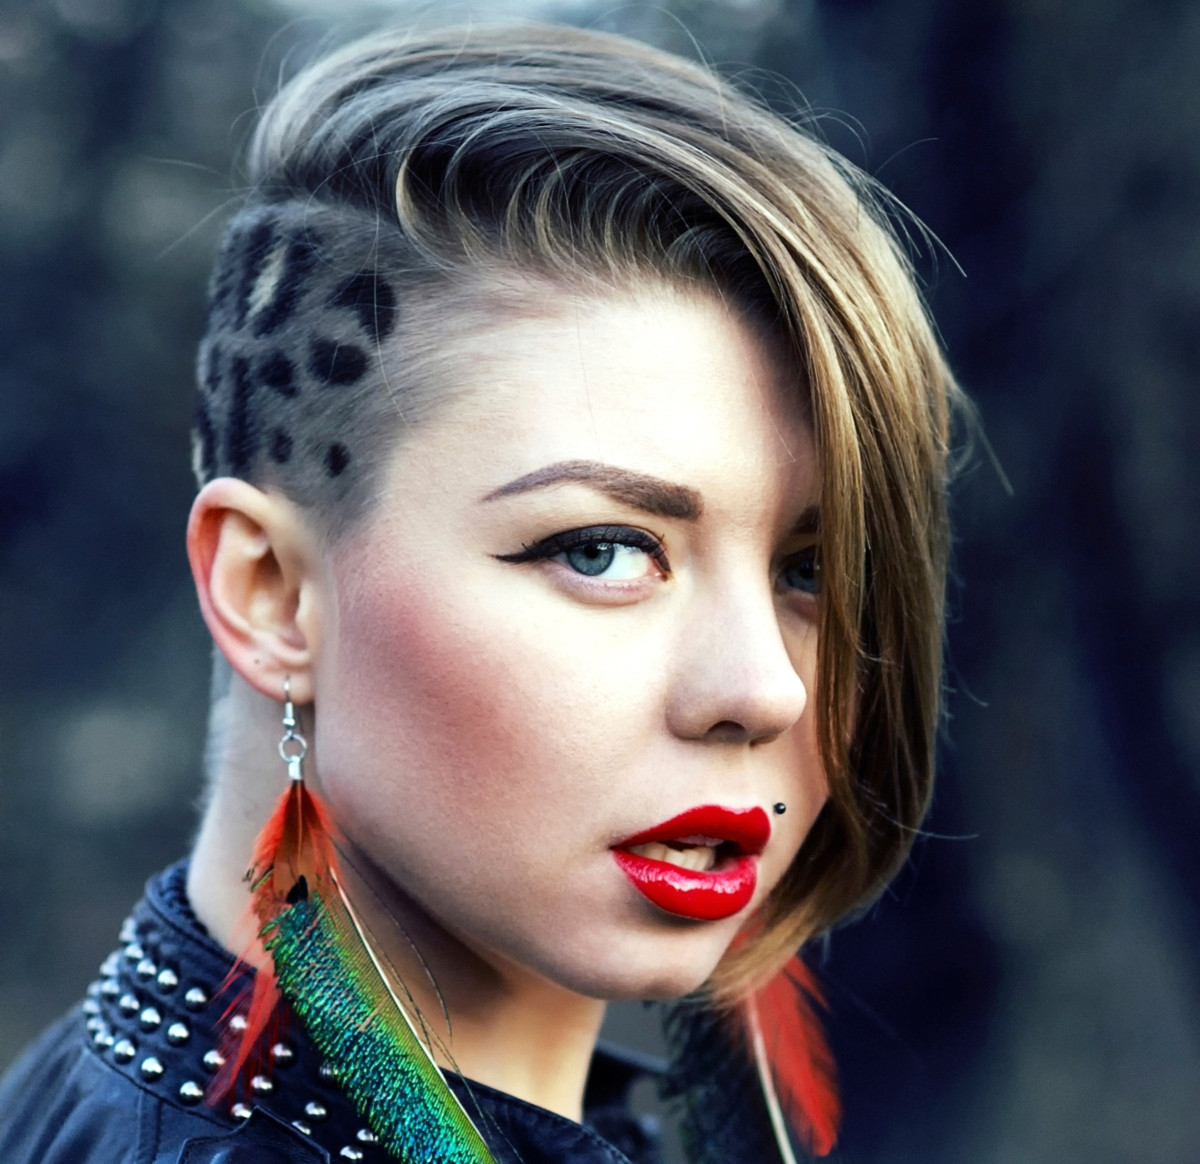 Female Punk Hairstyles
 Girls Dress Your Tresses With These Punk Hairstyles